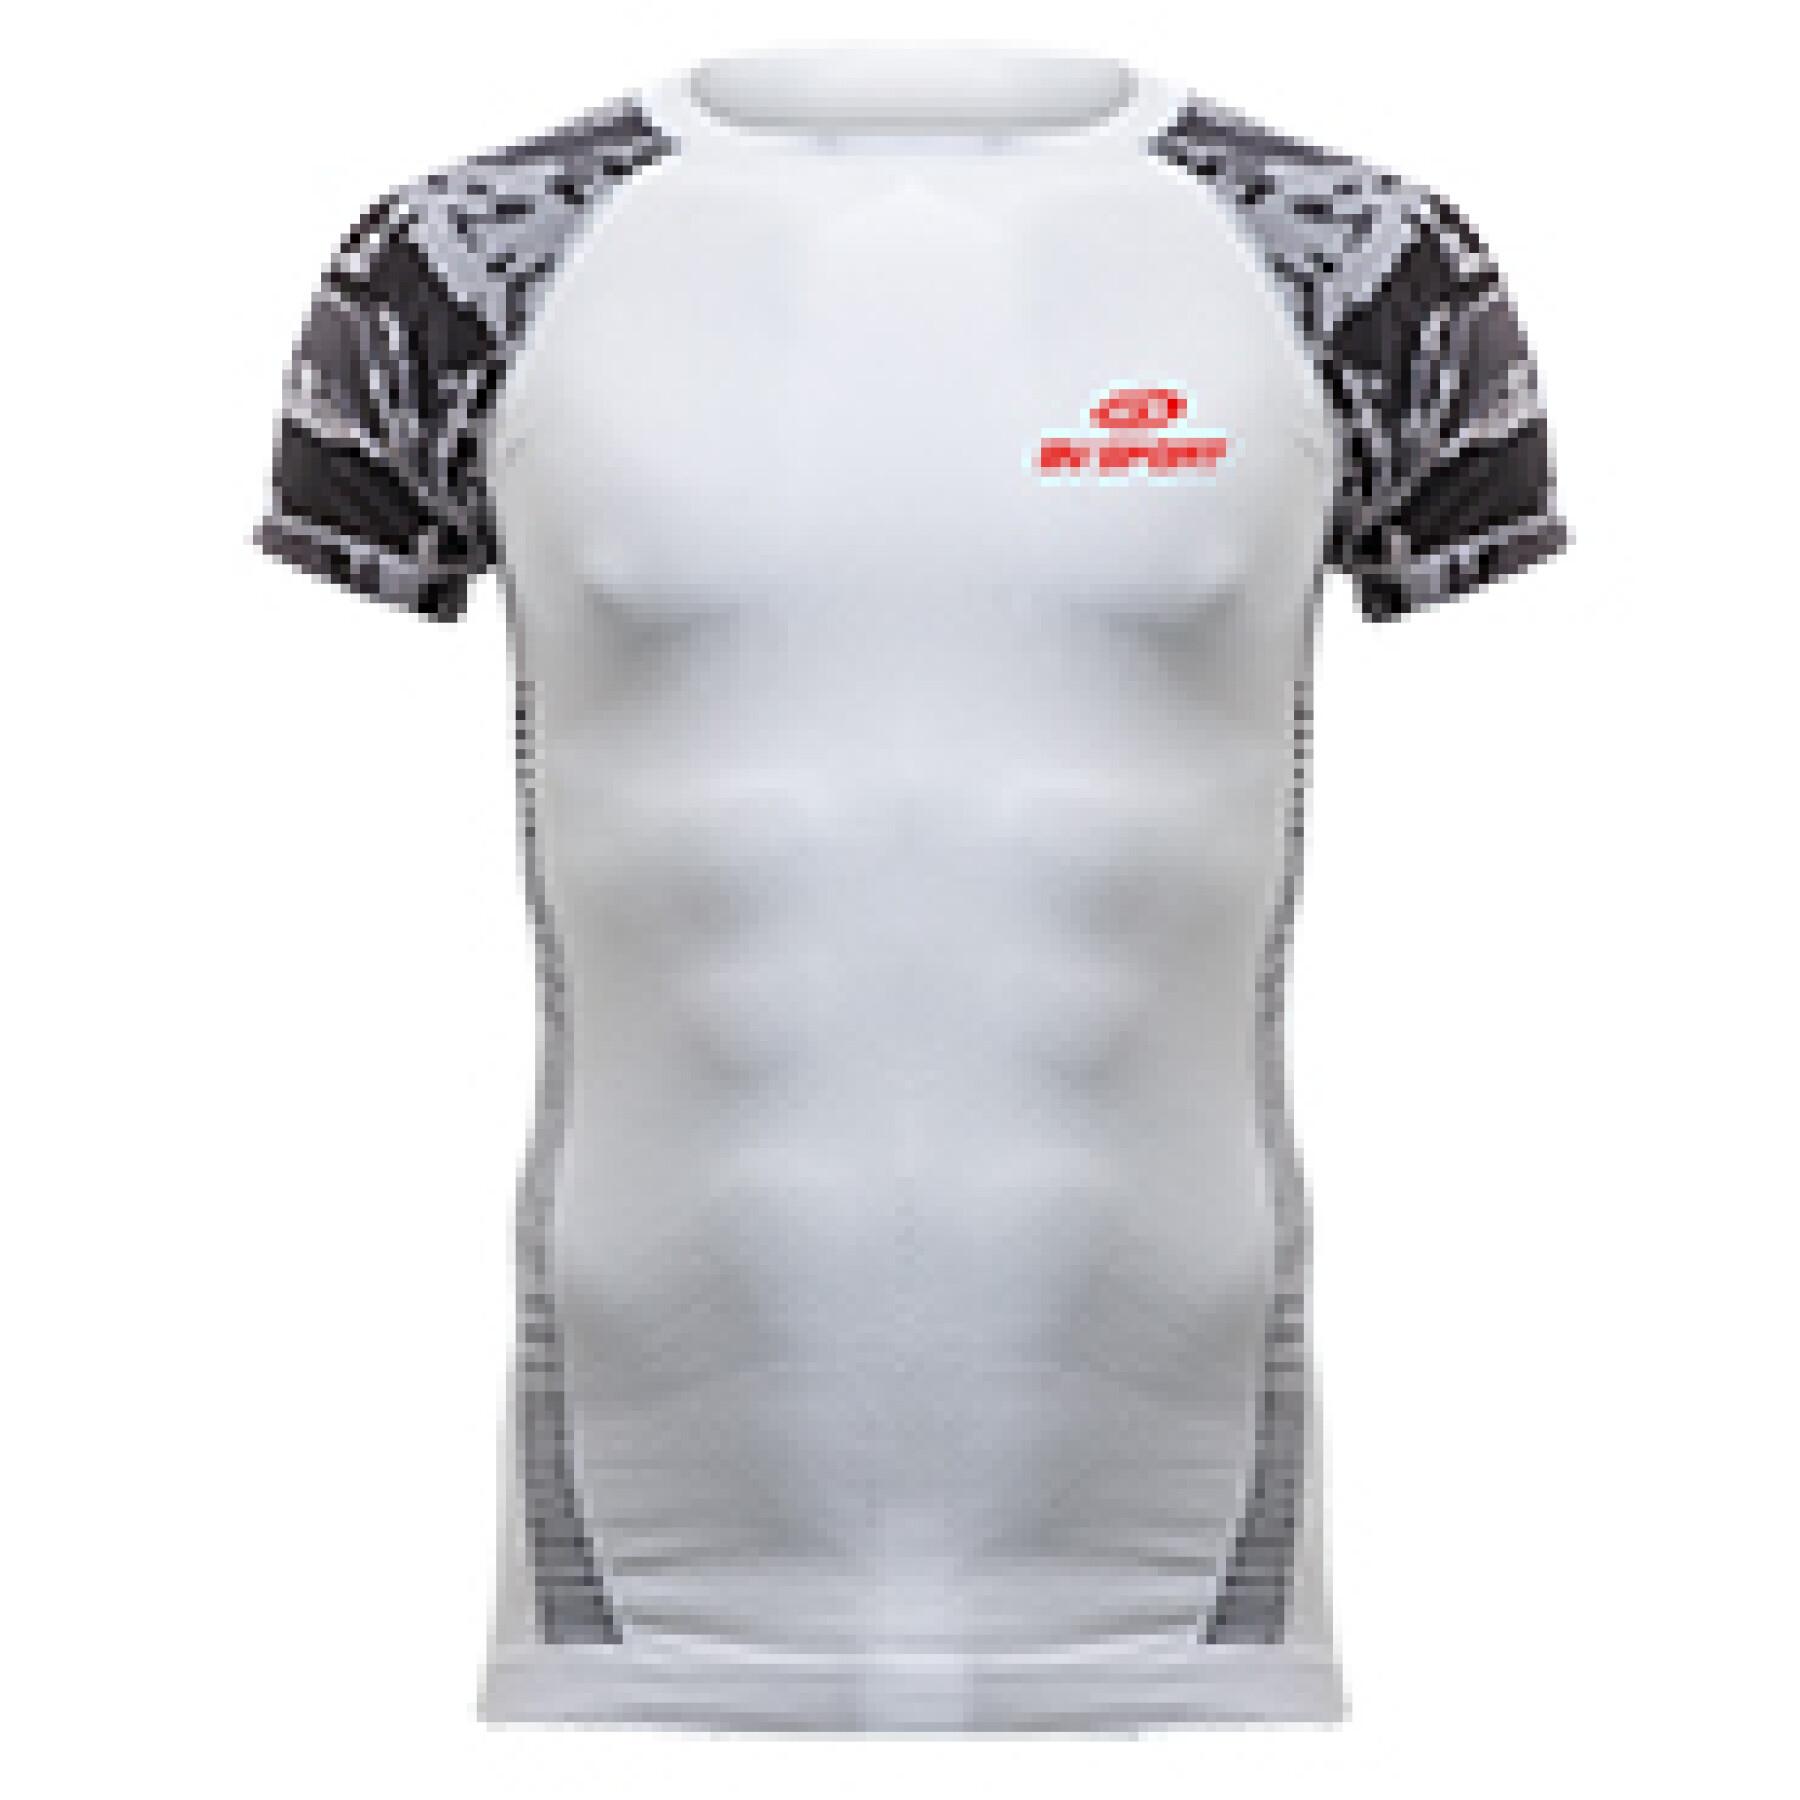 Maillot BV Sport R-Tech Limited Army